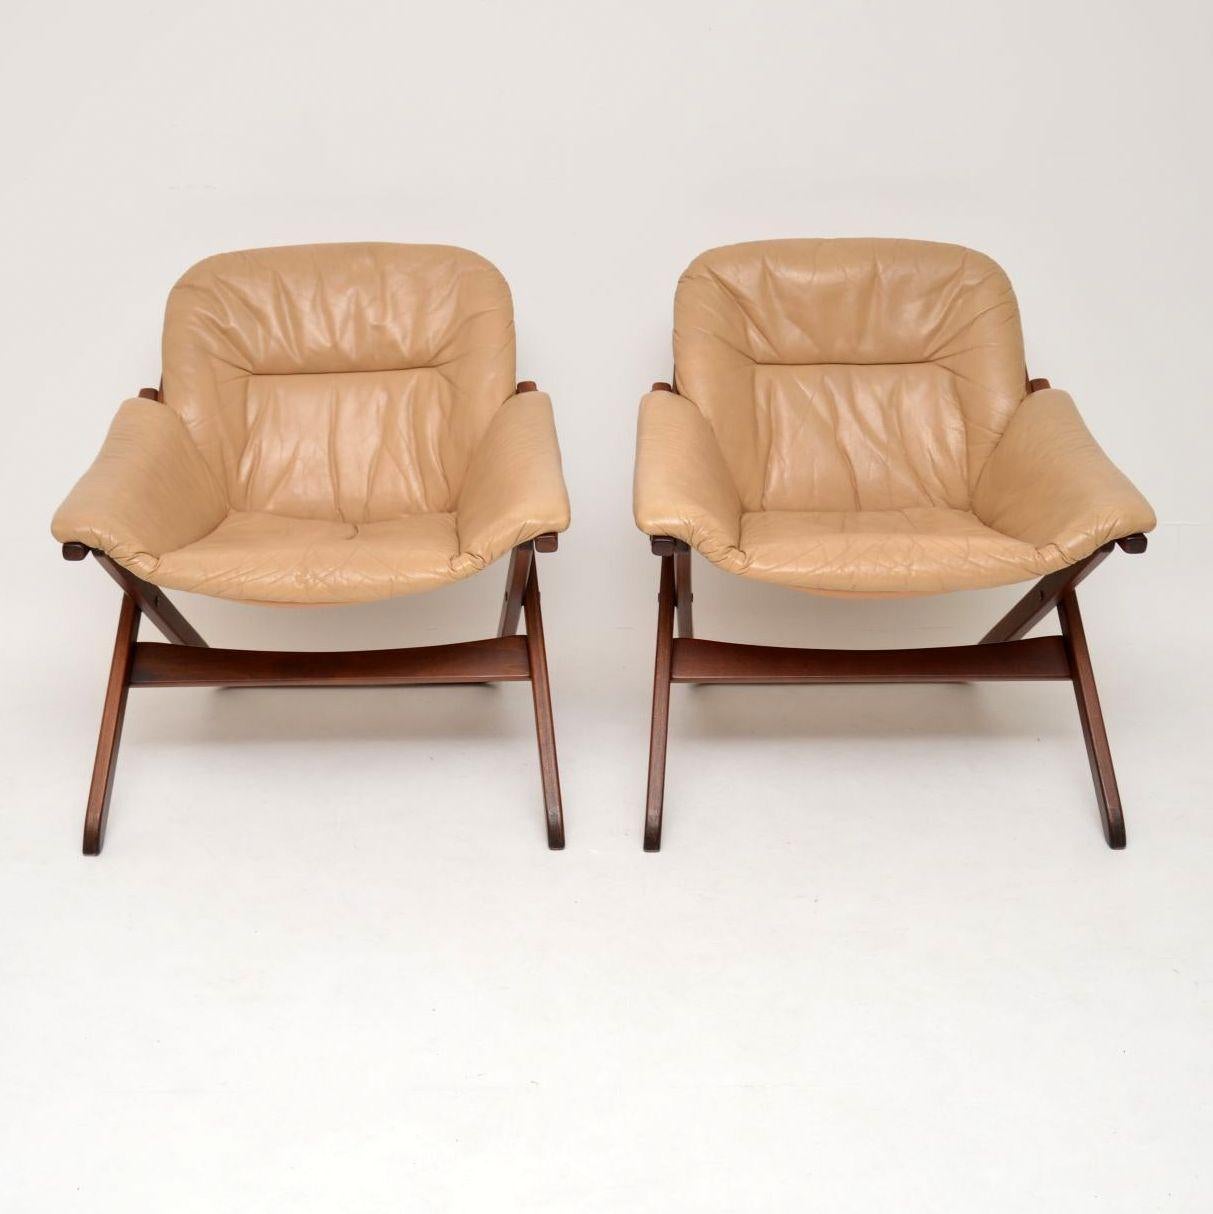 A stylish and extremely comfortable pair of vintage leather armchairs, these were made in Sweden and date from the 1970s. They are in excellent condition for their age, with only some extremely minor surface wear here and there.

Measures: Width